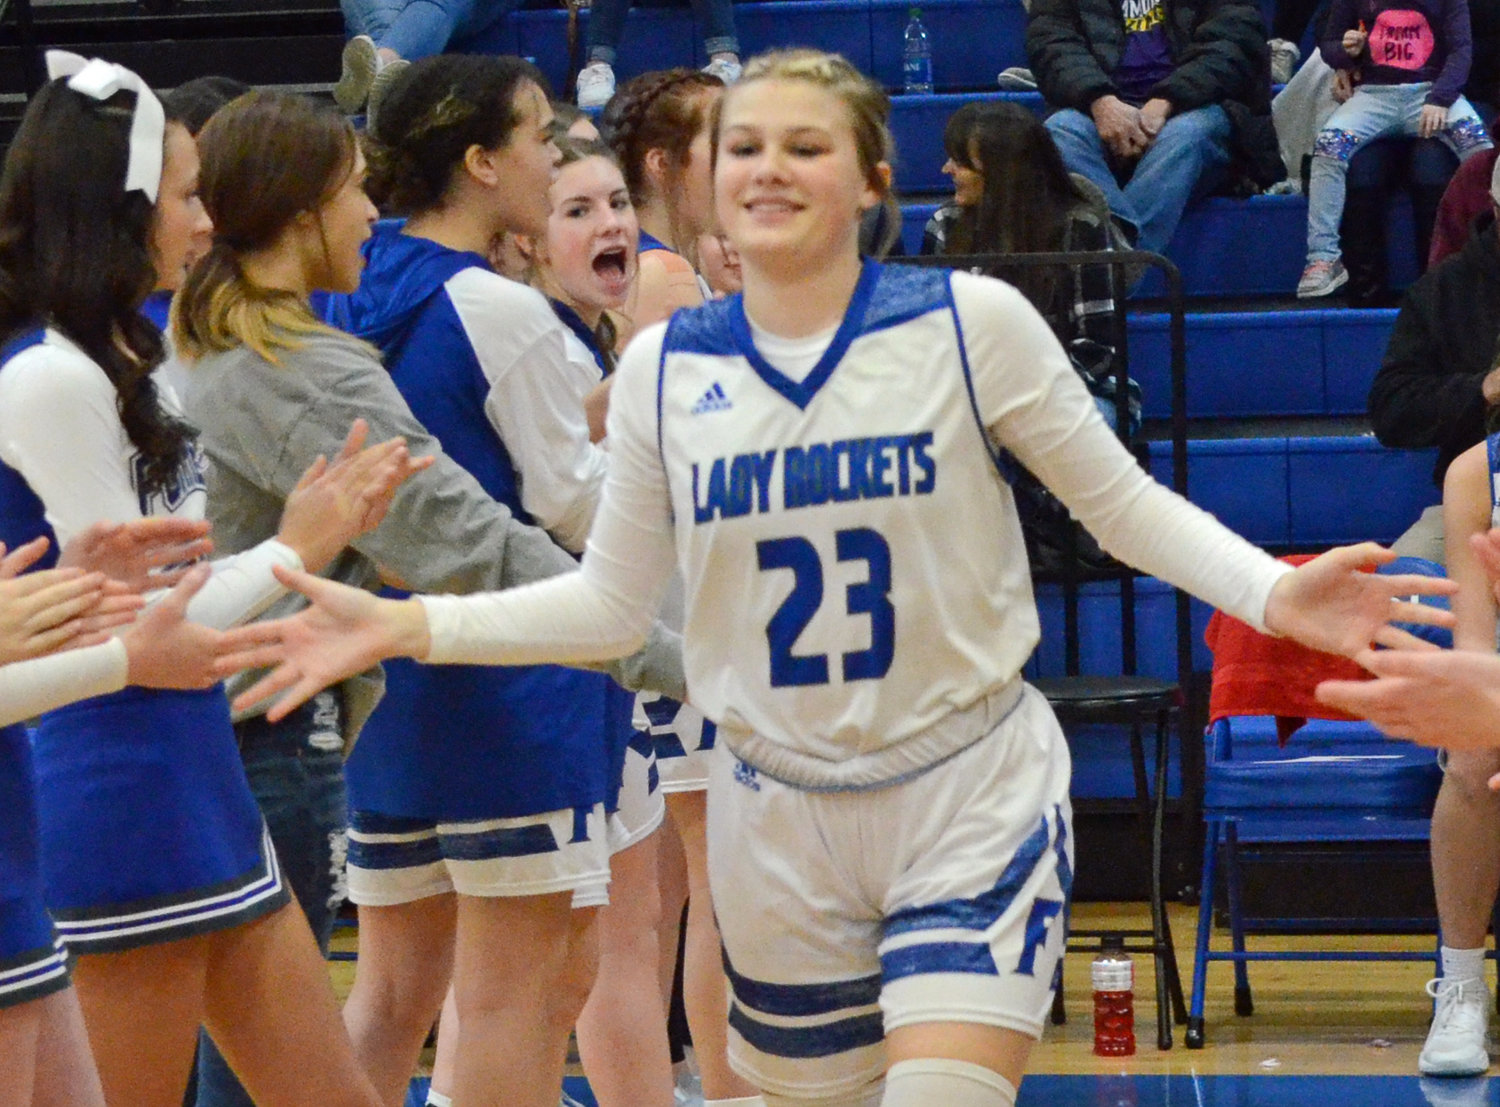 Freshman Kinslee Inlow led the Lady Rockets in scoring with 15 points, including four 3-pointers.